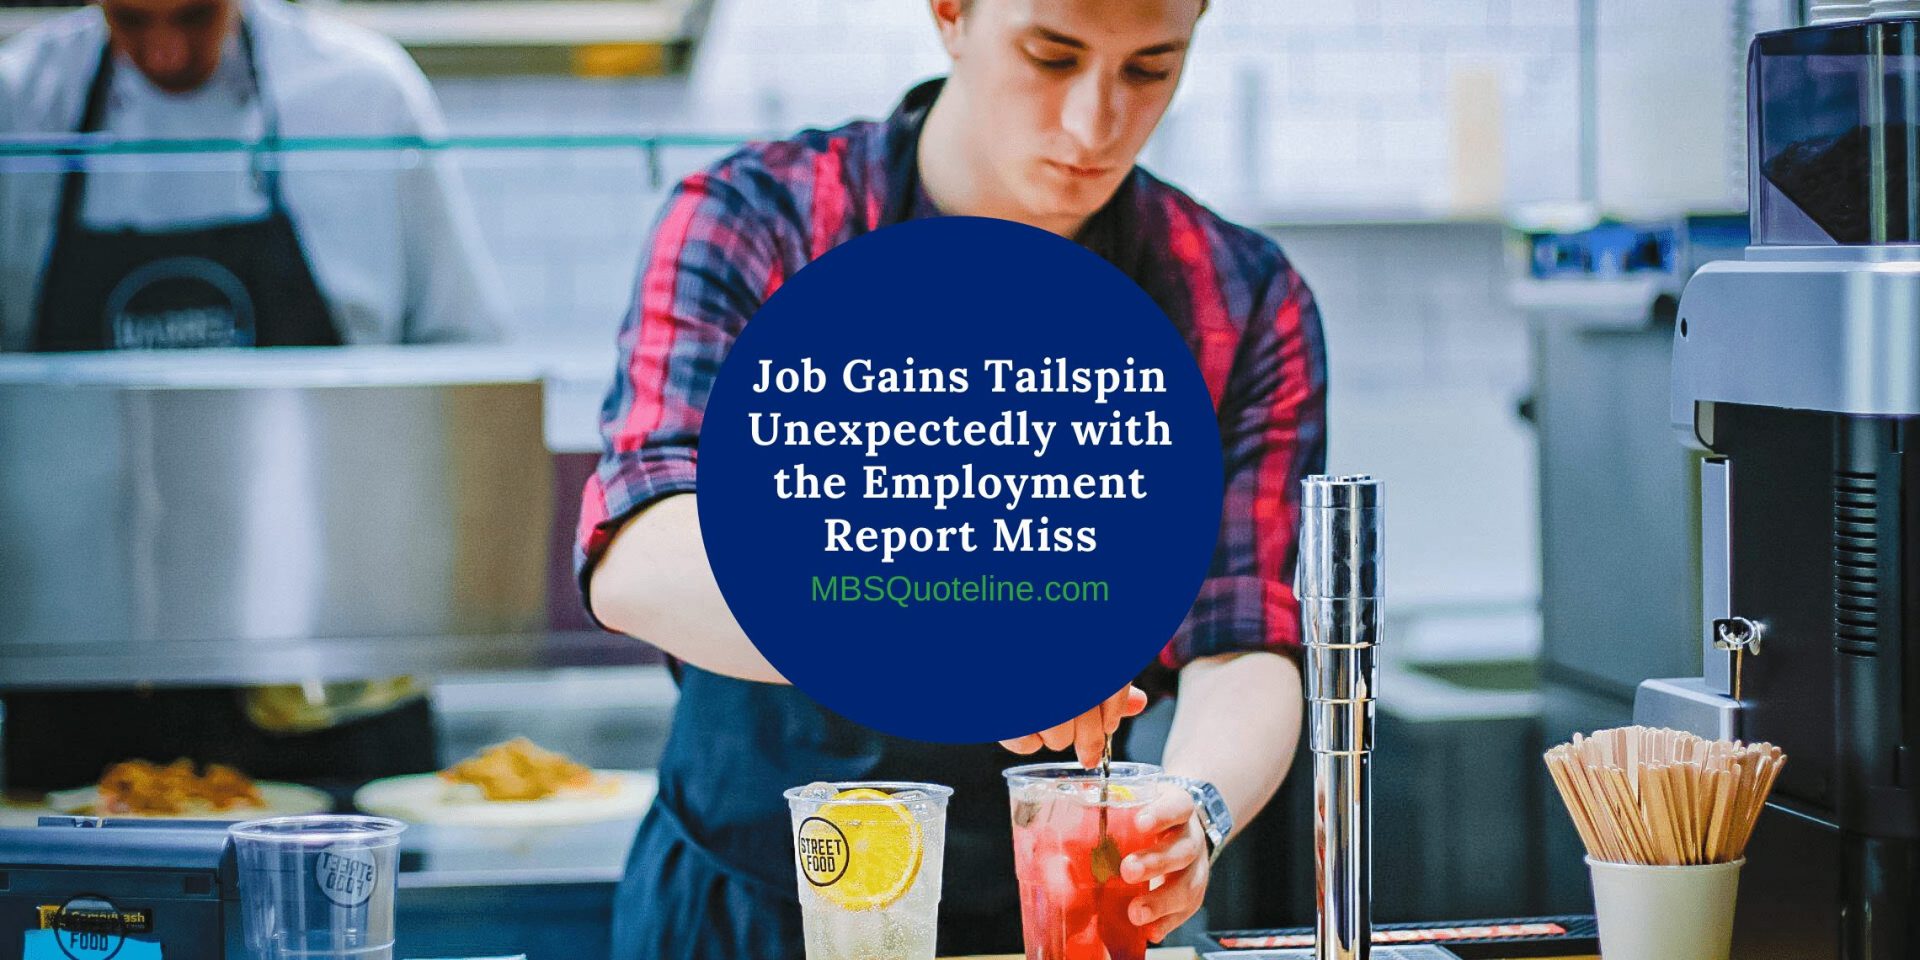 Job Gains Tailspin Unexpectedly with Employment Report Miss MortgageTime MBSQuoteline Featured